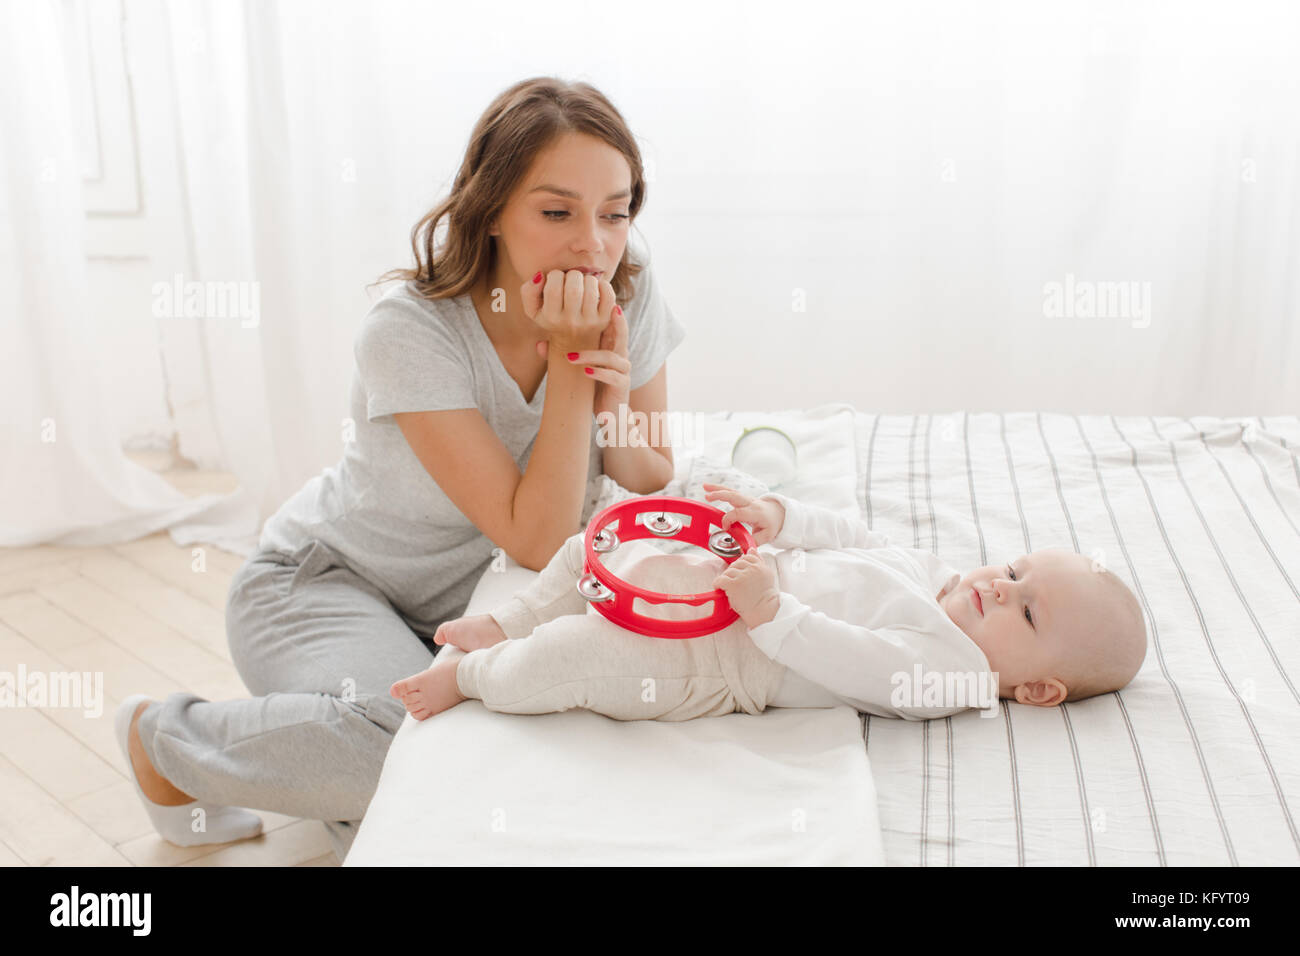 Pensive mother with baby in bedroom Stock Photo